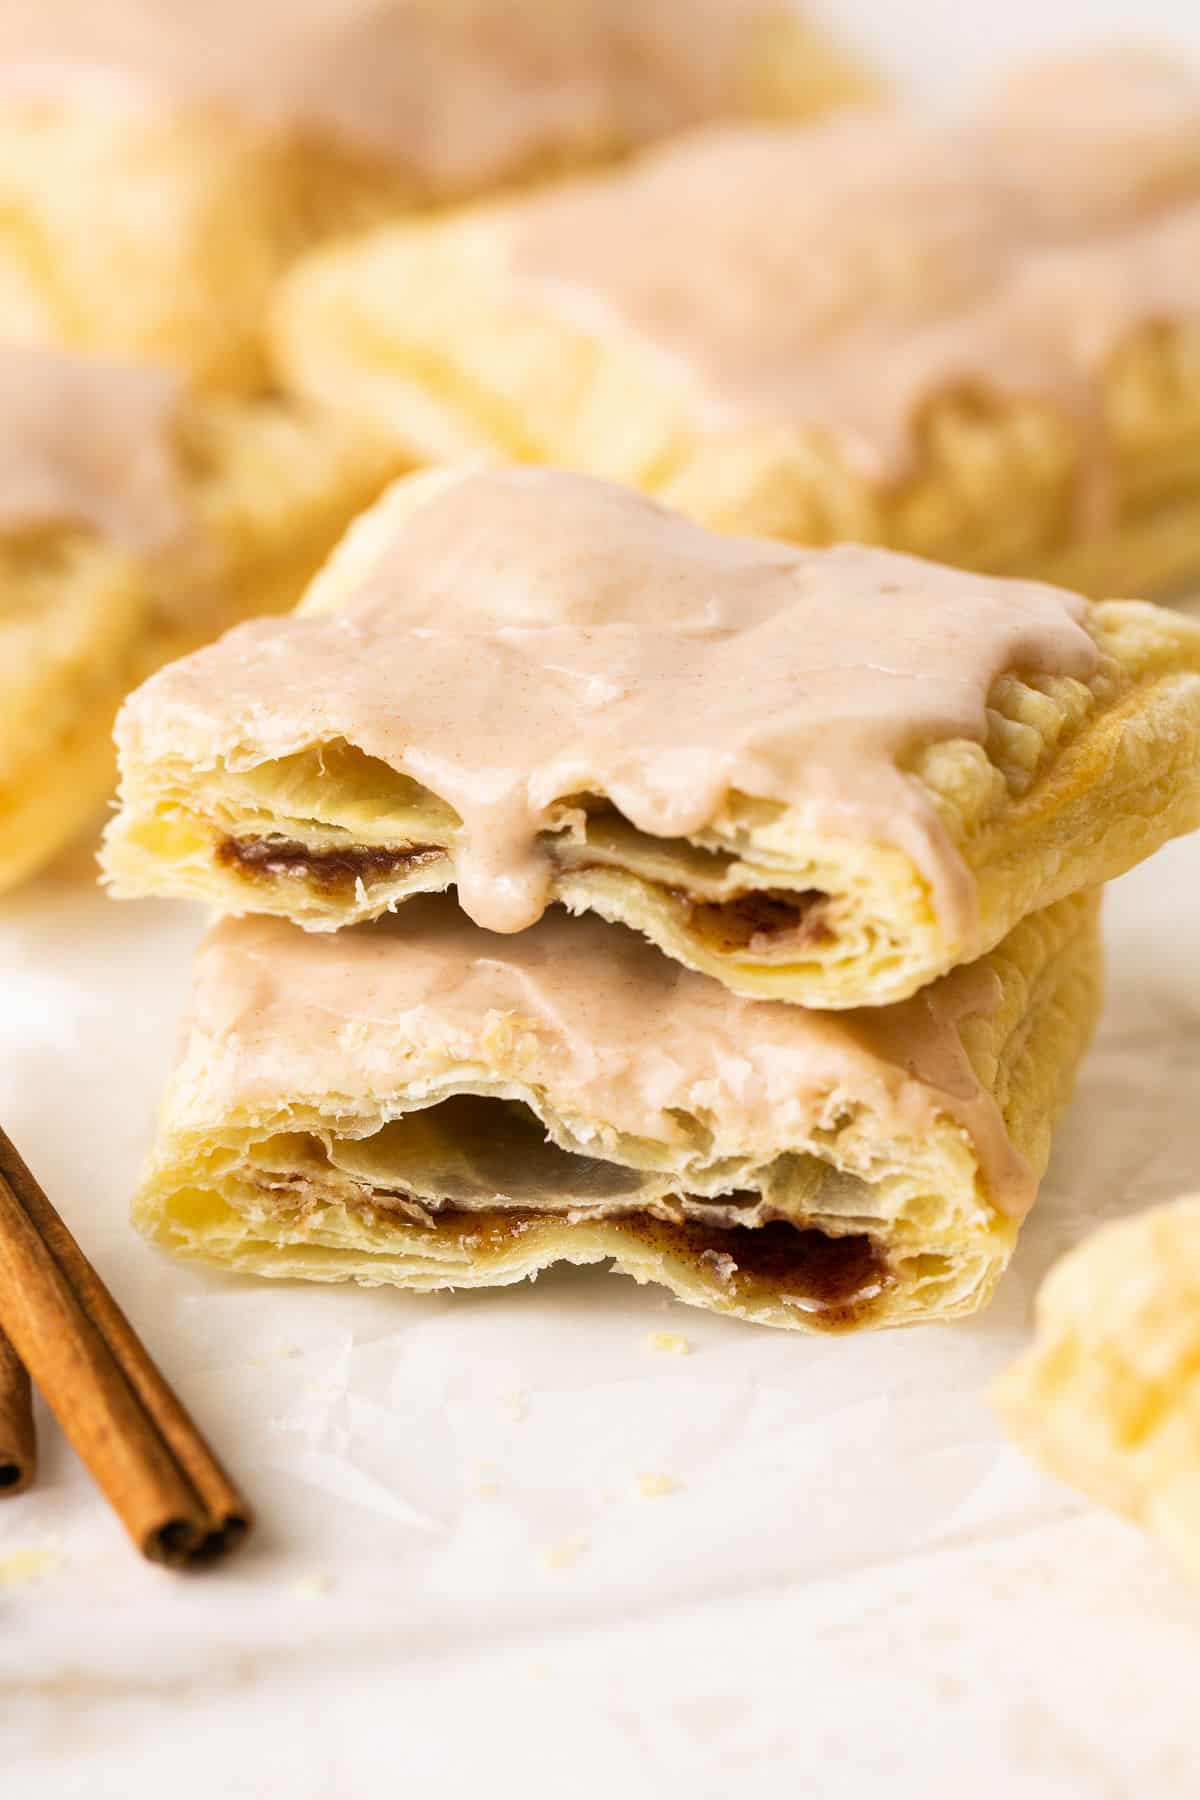 Air fryer pop tart broken in half with a crisp, flaky crust and brown sugar filling, topped with frosting and garnished with cinnamon sticks.